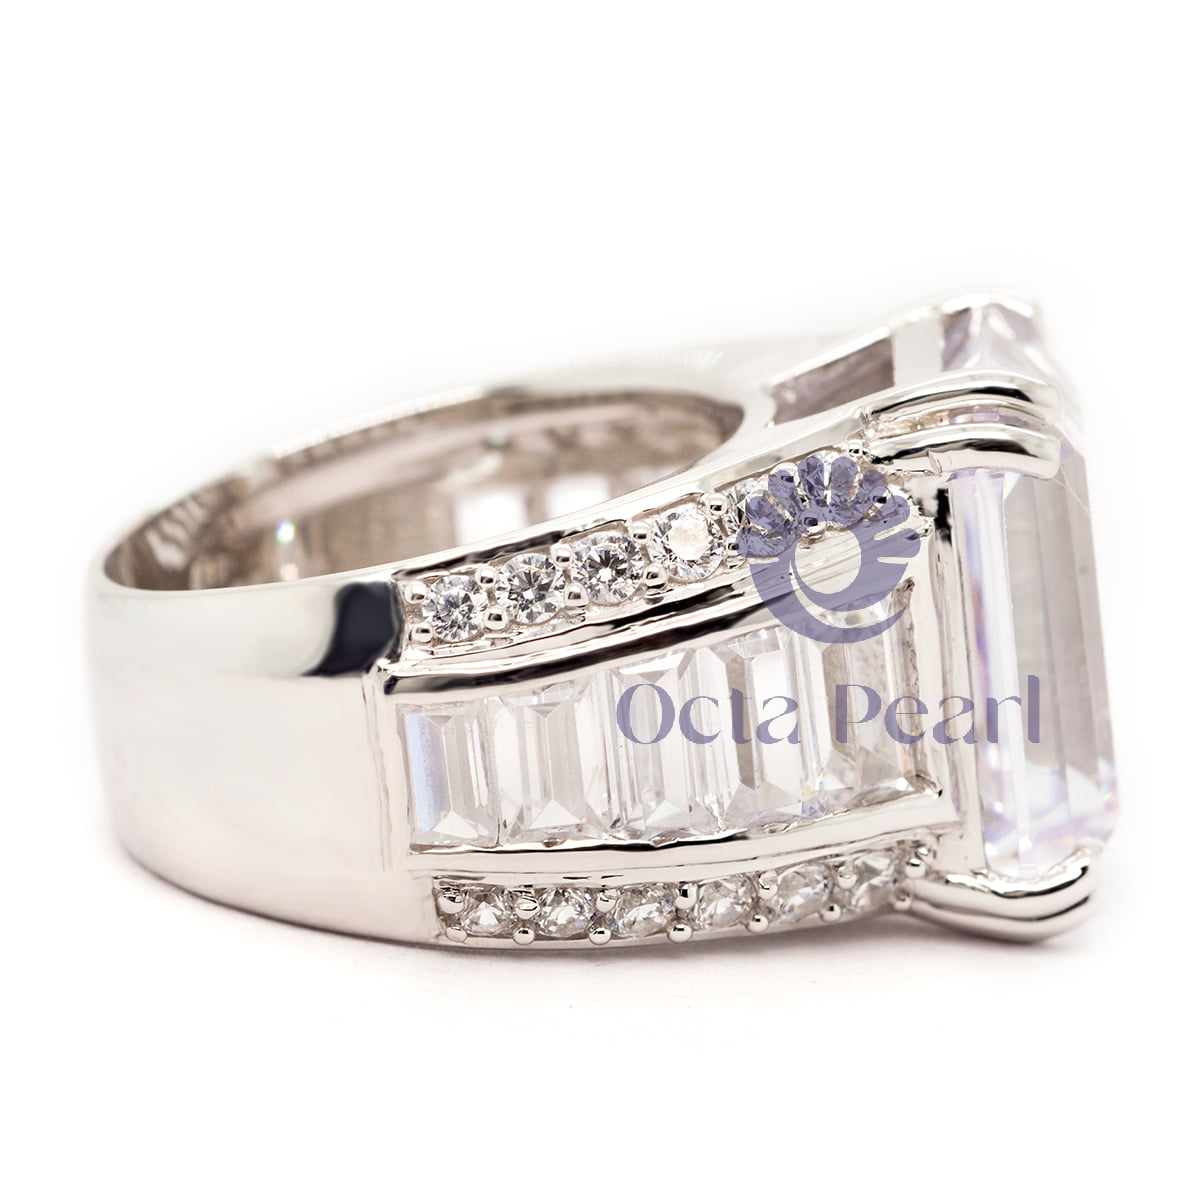 Emerald Cut Cocktail Ring